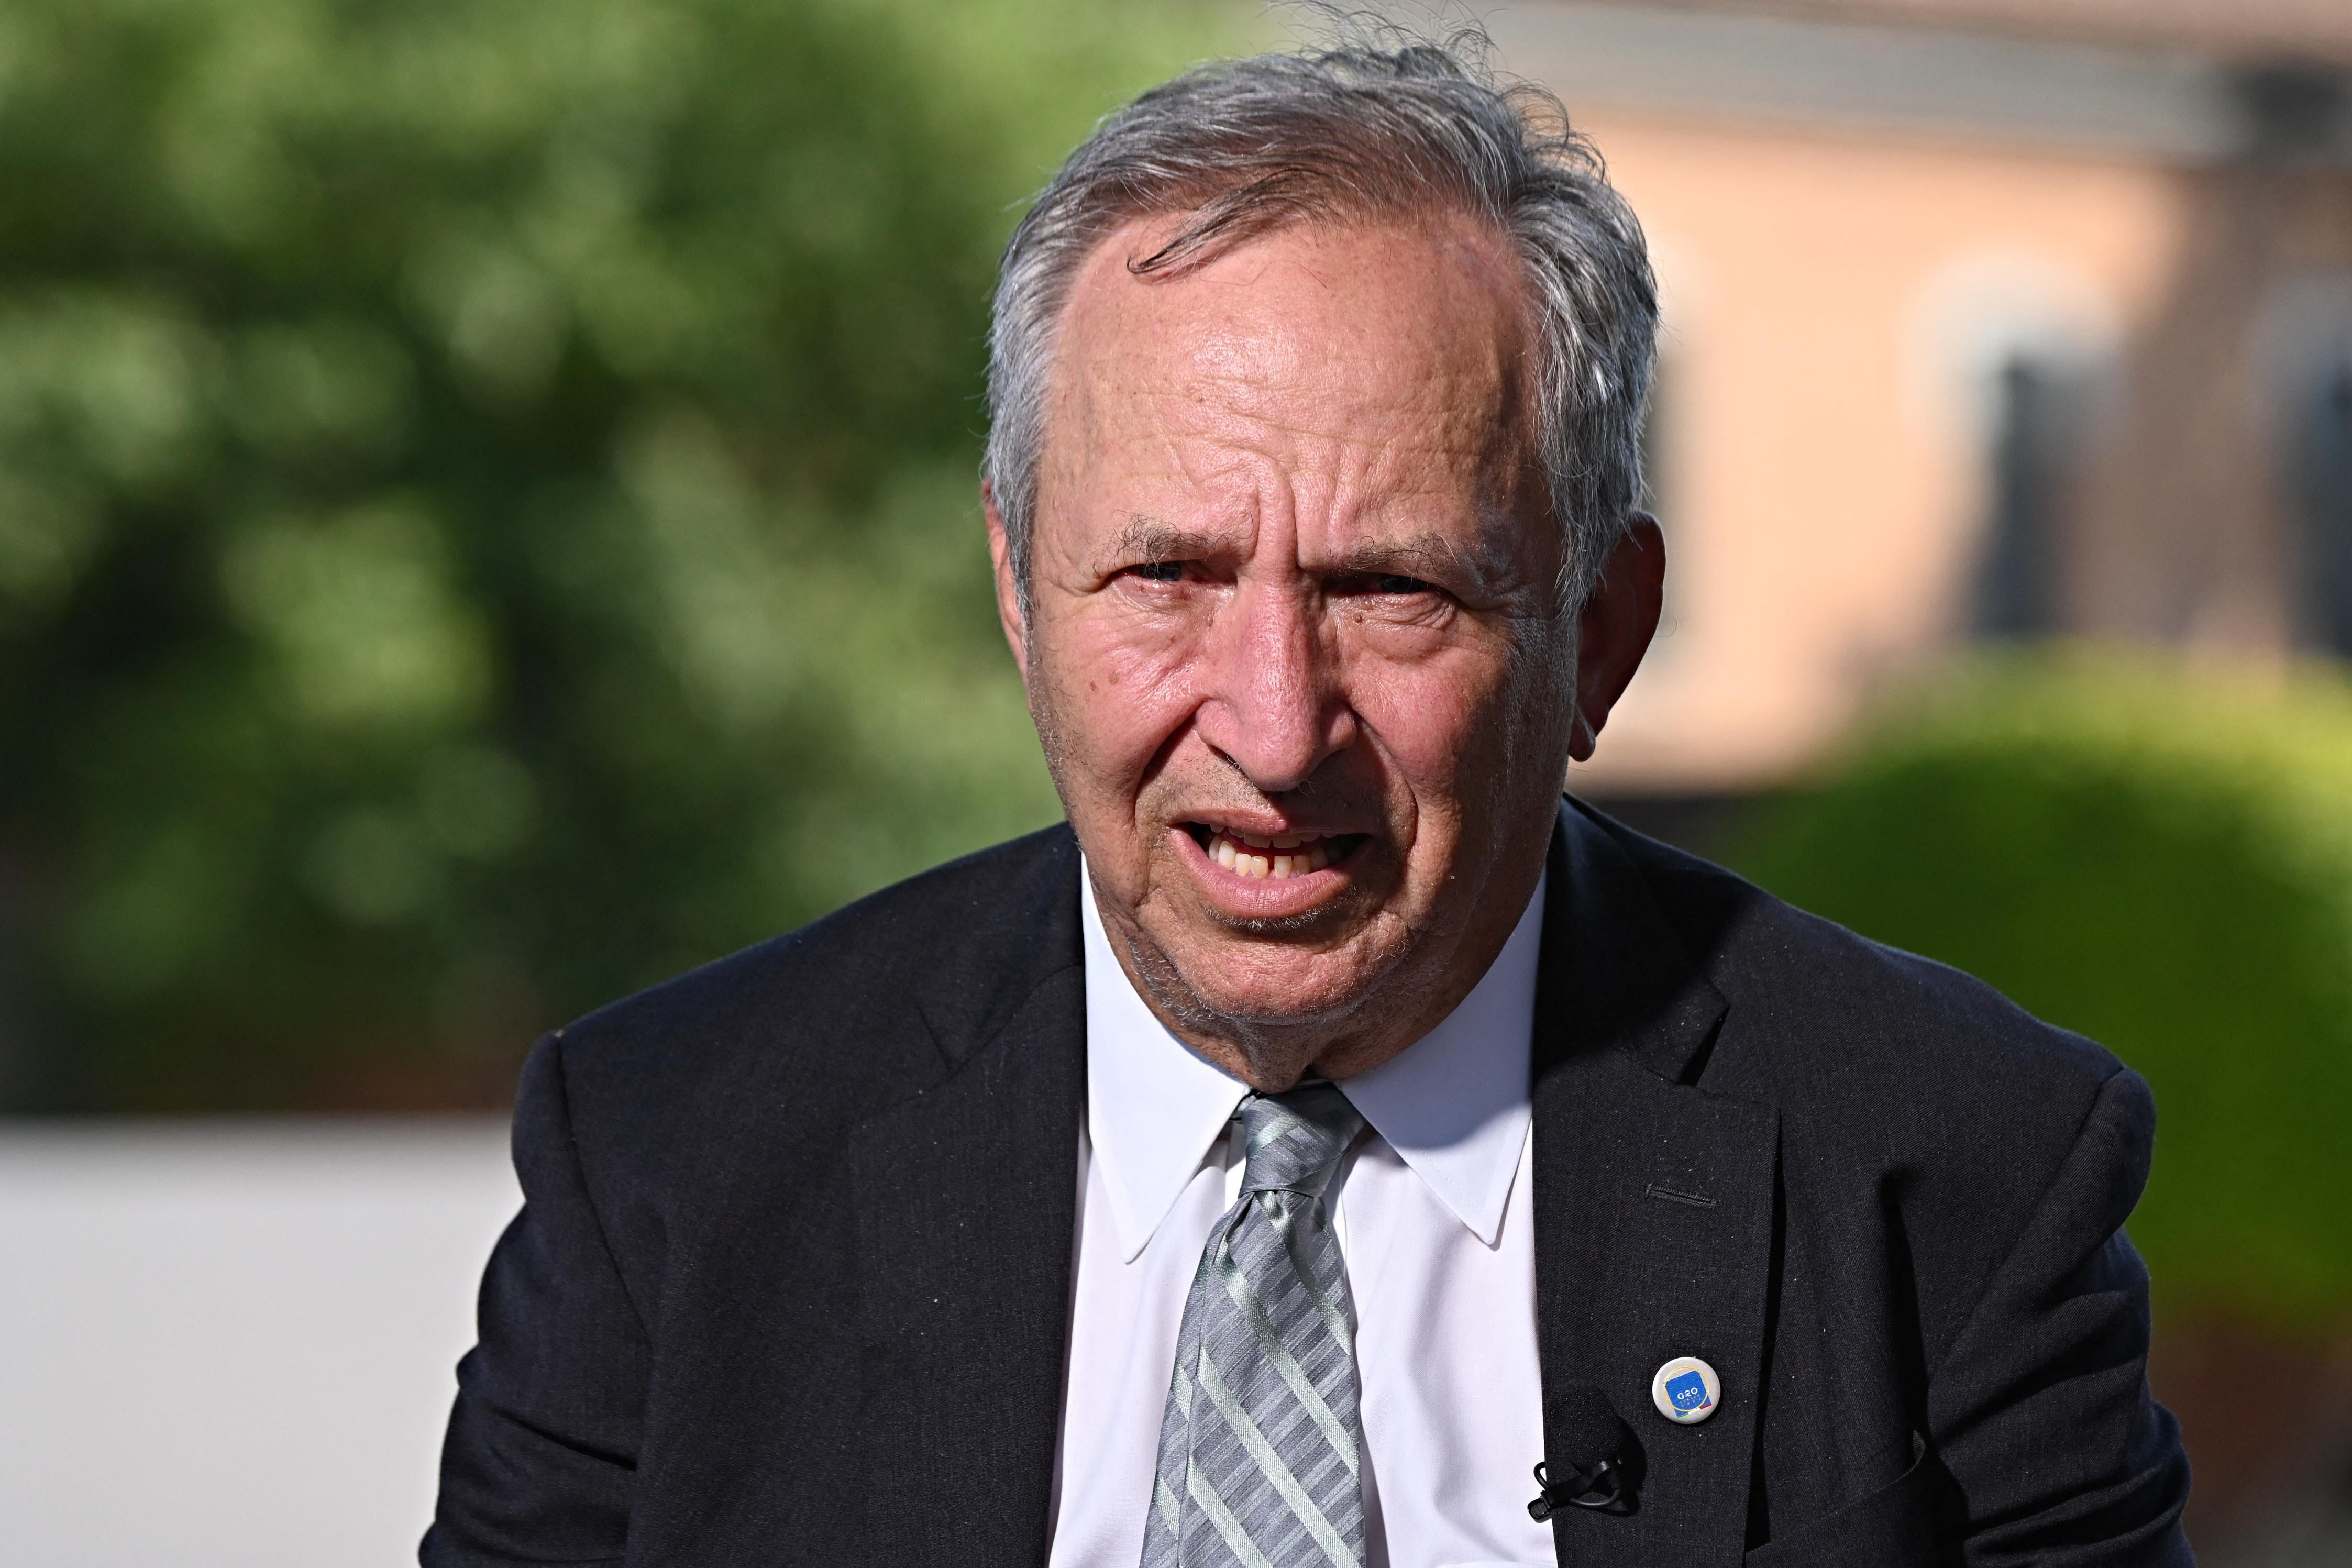 Larry Summers, outdoors looking at the camera as he speaks.